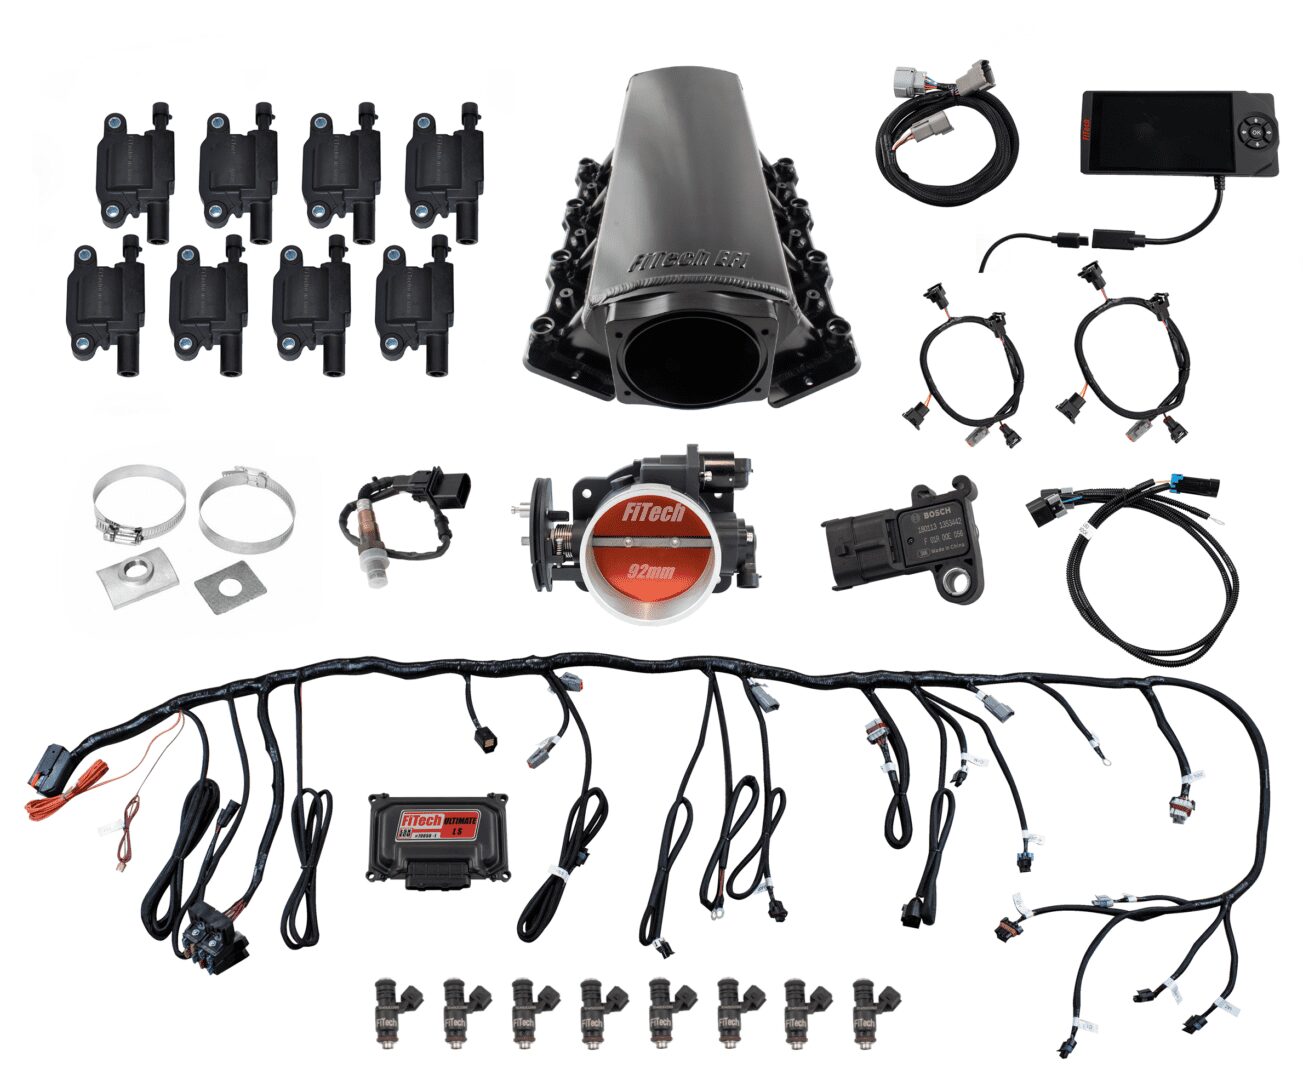 FiTech 78007 Ultimate LS Truck Kit (500 HP/Trans Control/Tight-Fit In-Tank/Cathedral Port)